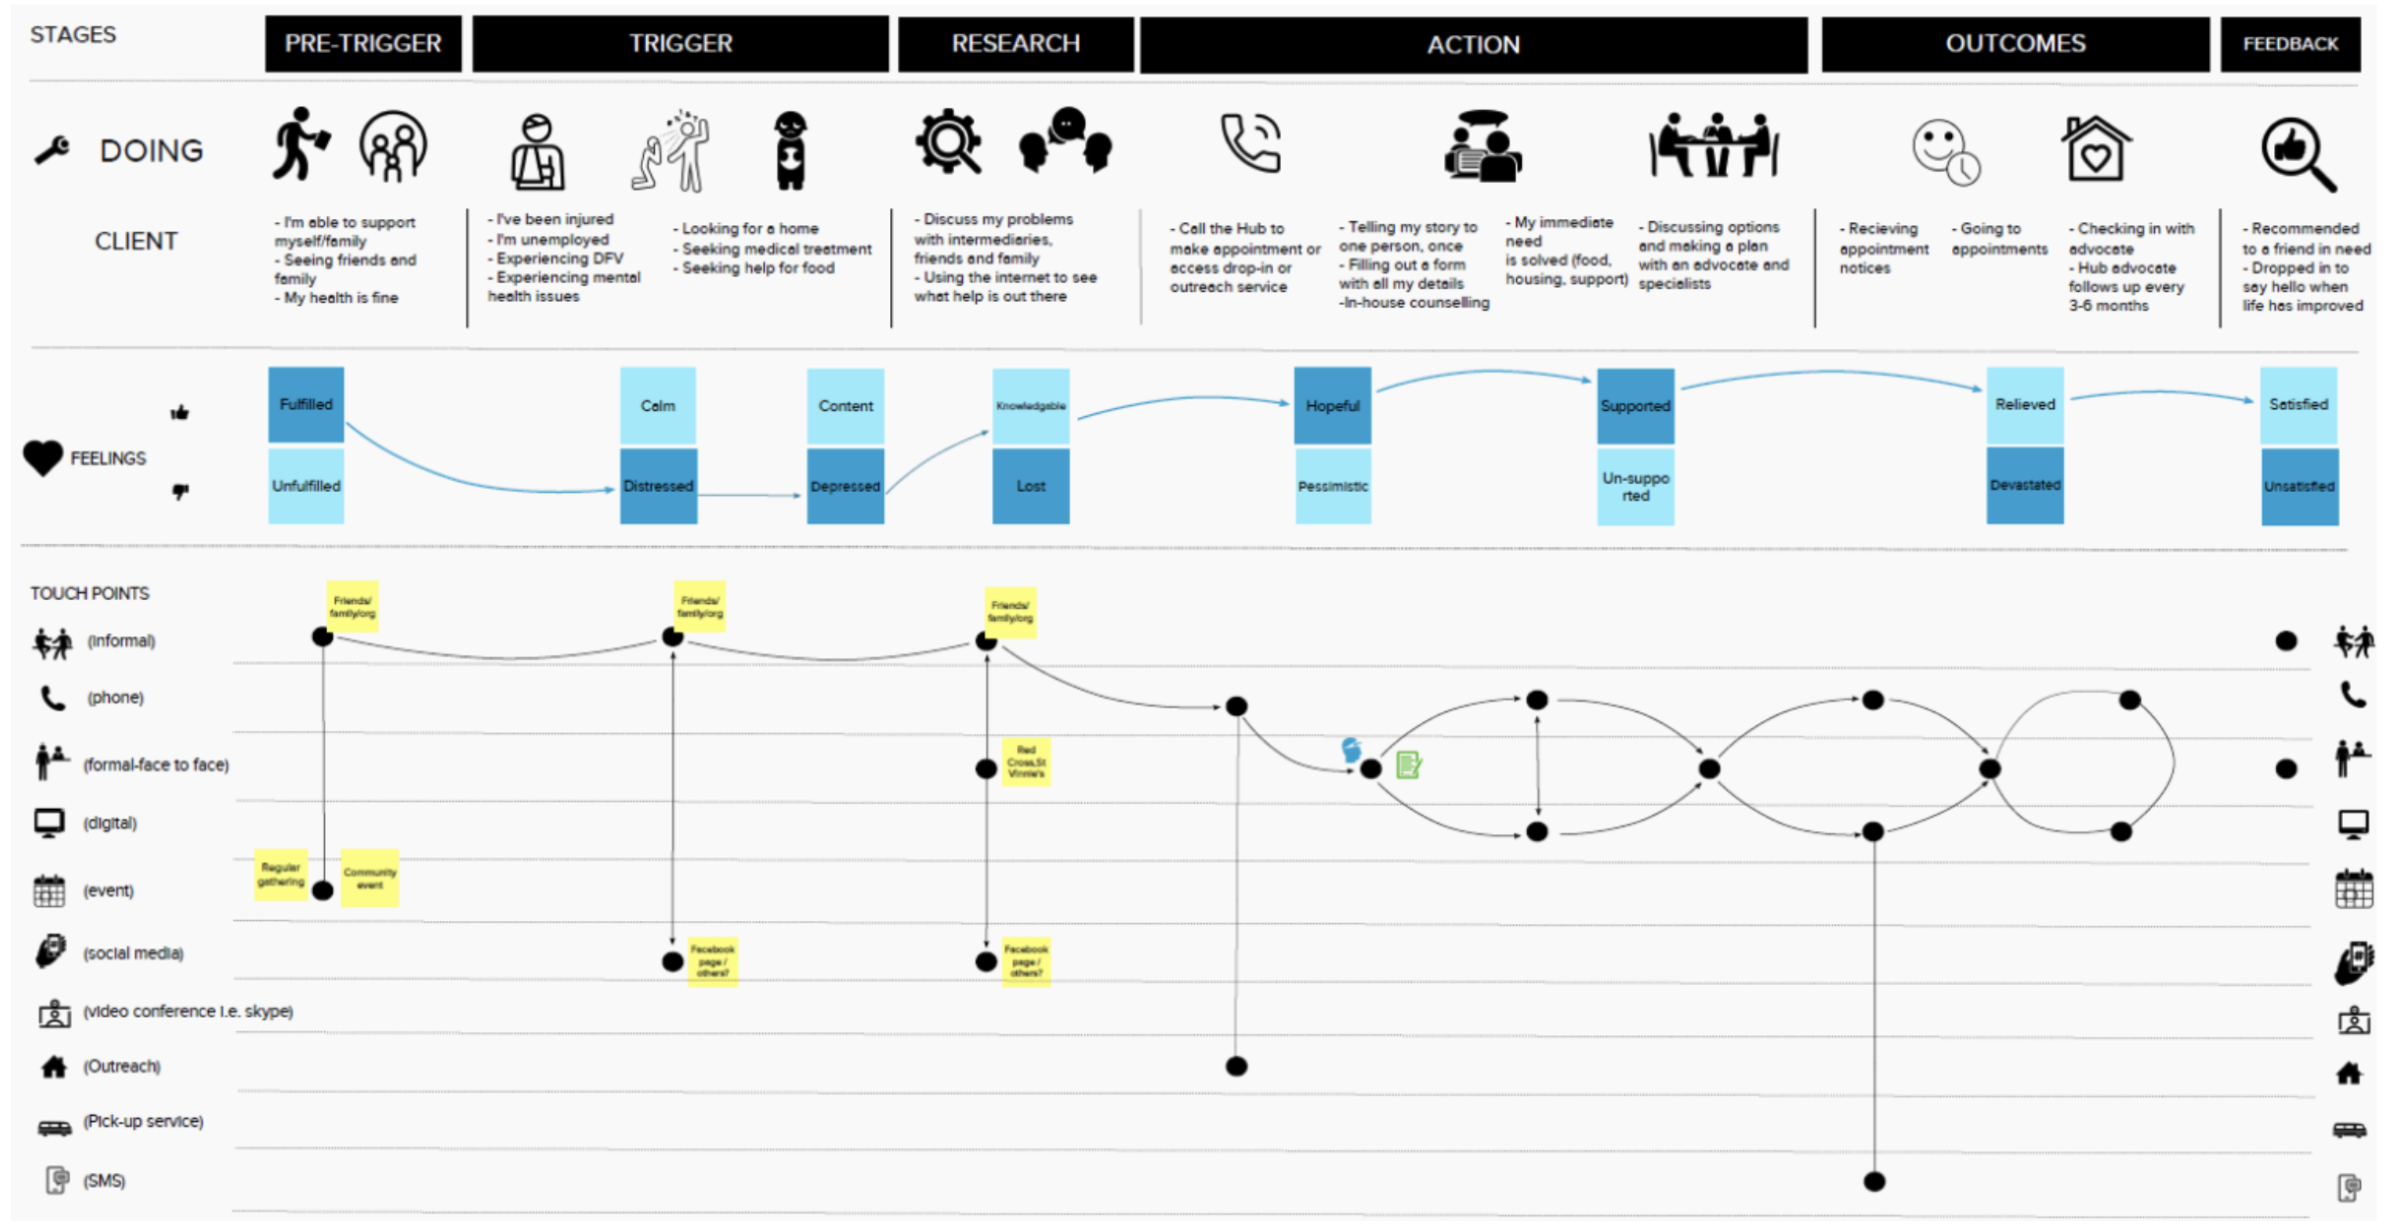 Example of a future state customer journey map from Queensland Government. The image shows stages like action and research with touchpoints.